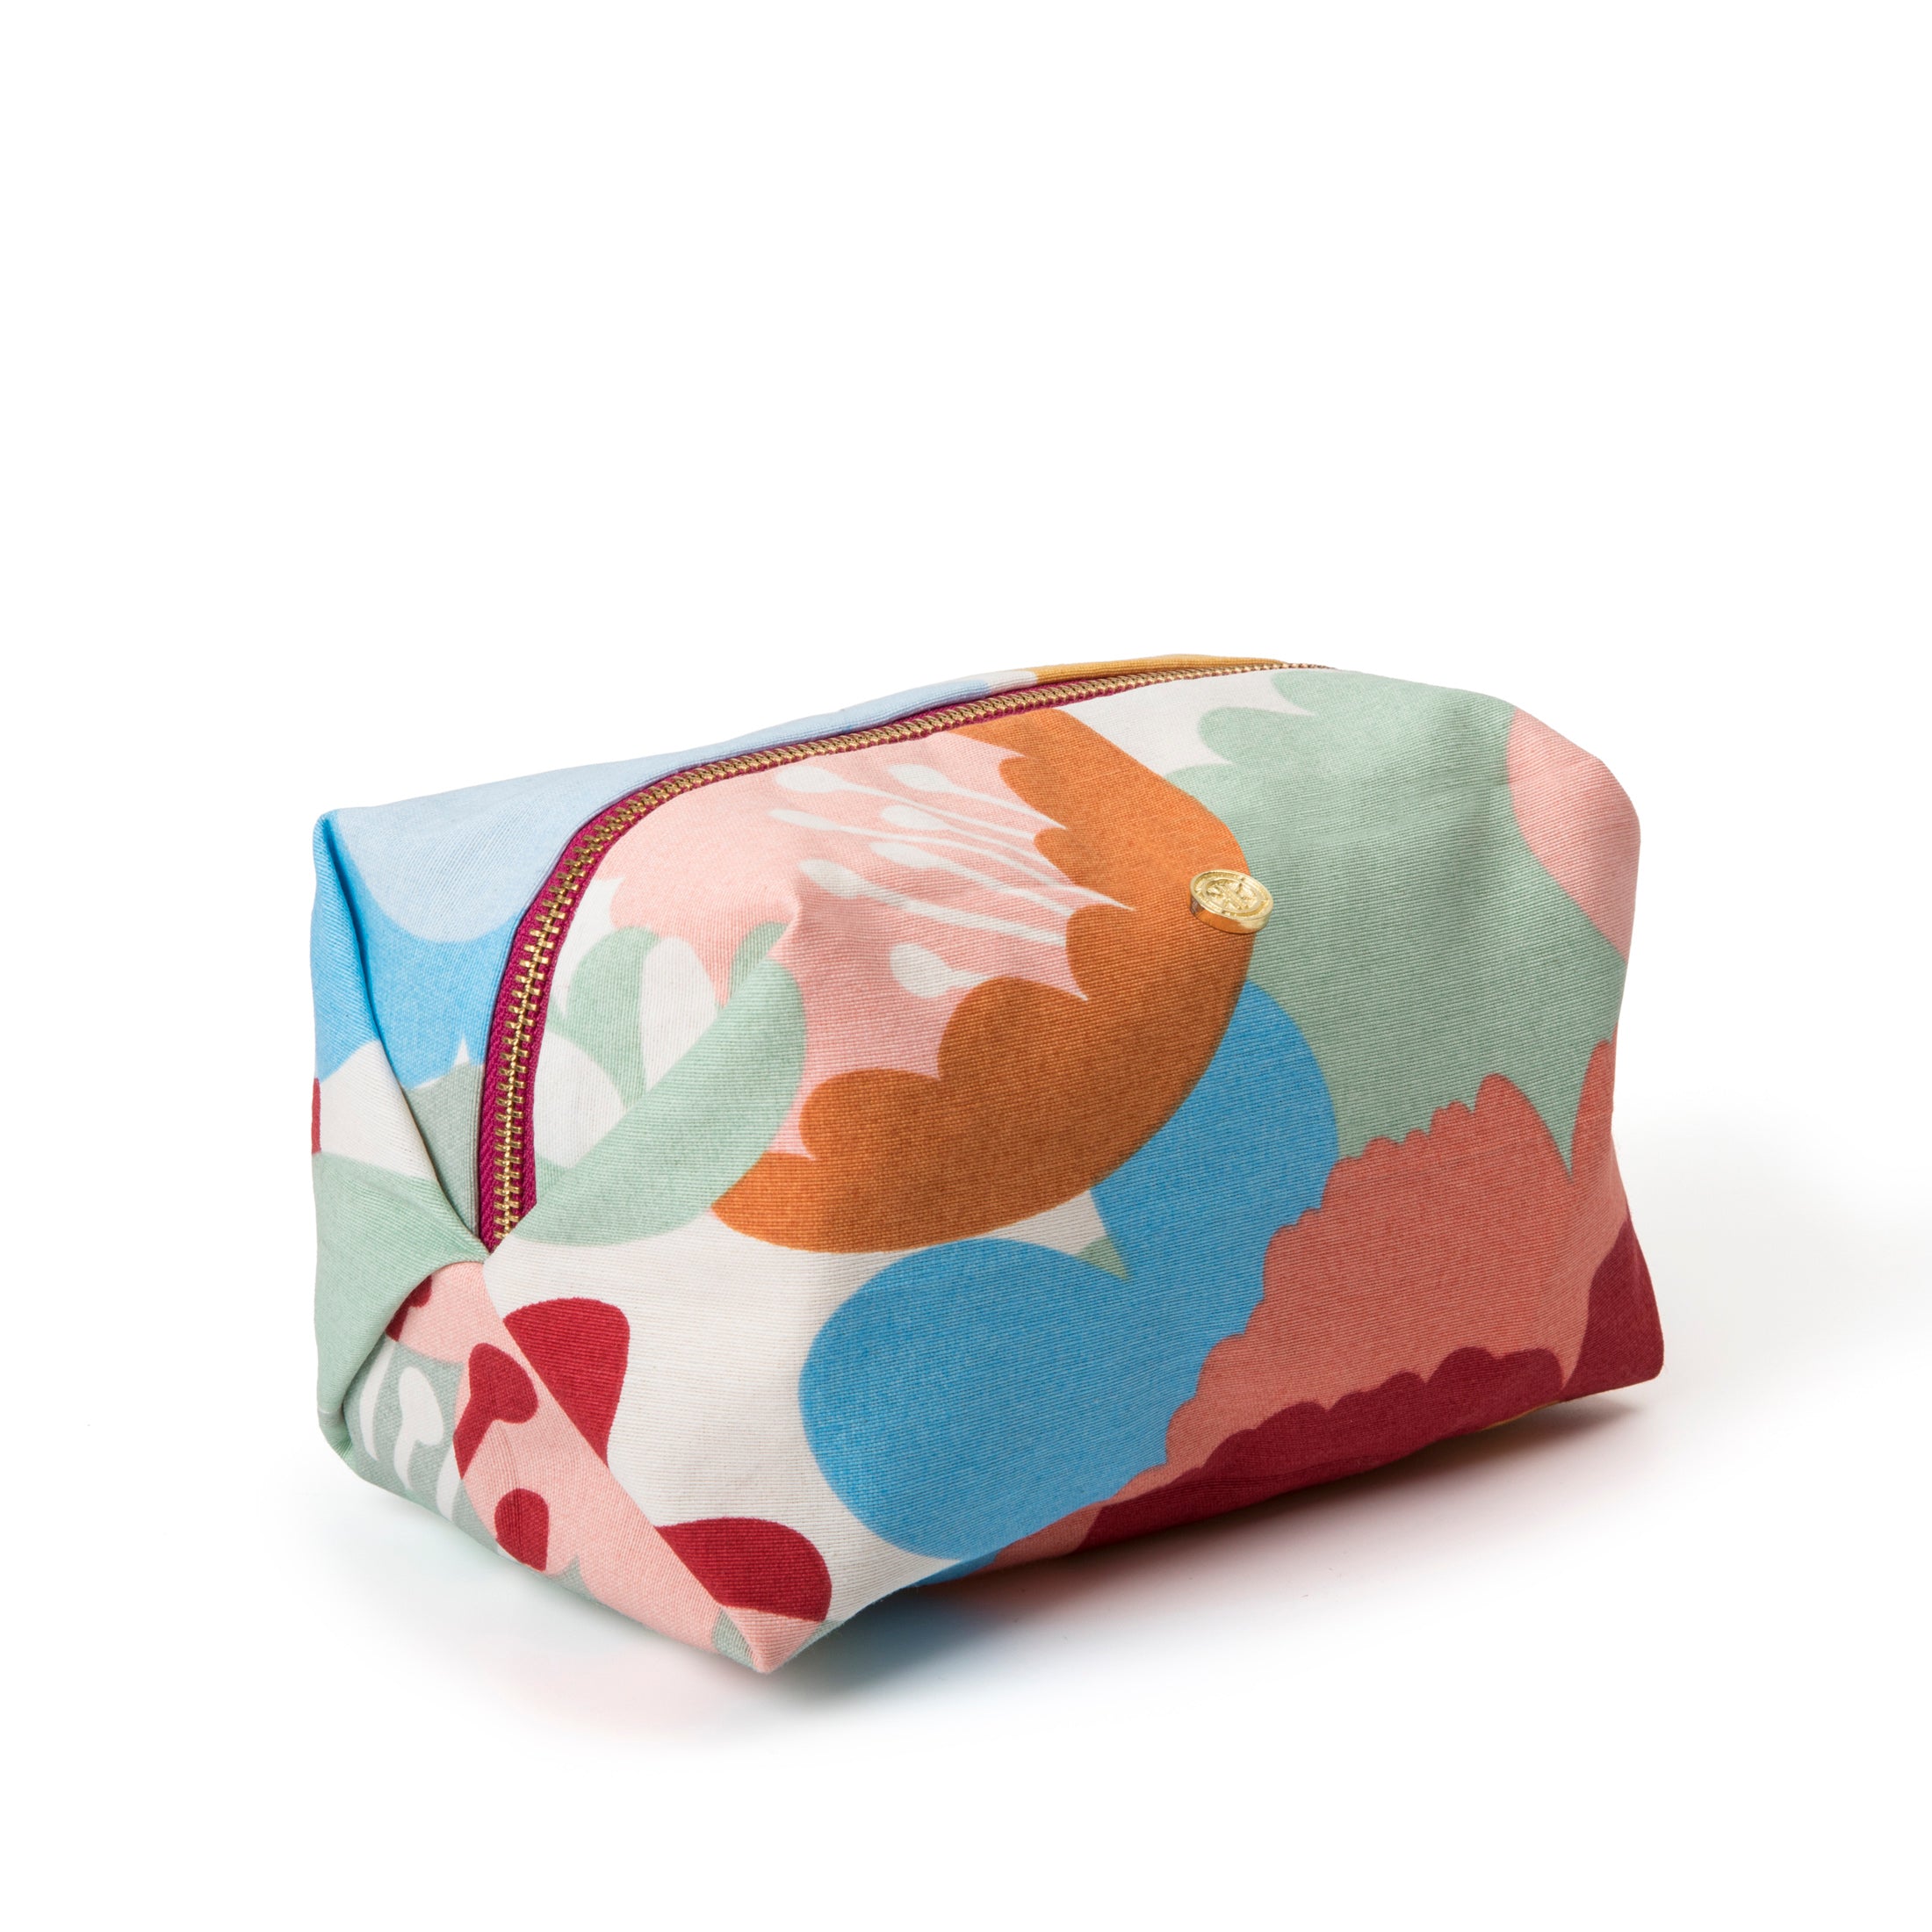 Floral and Striped Toiletry / Cosmetic Bags